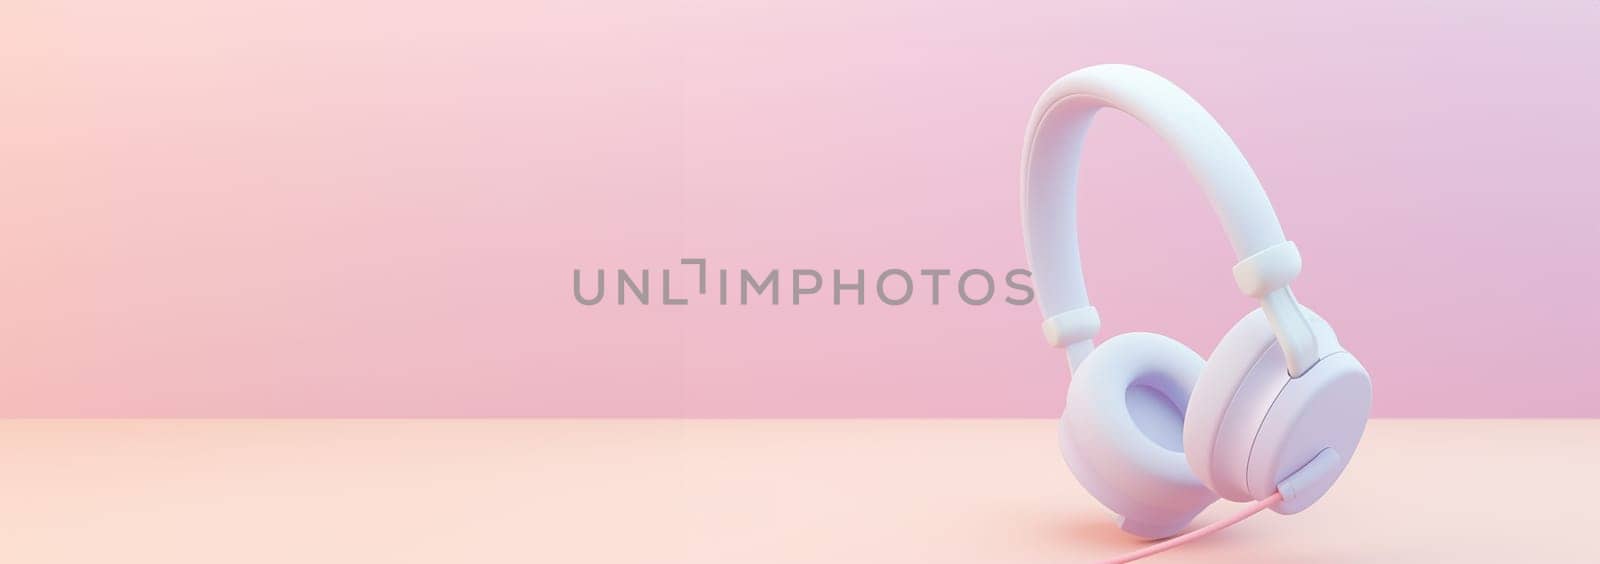 Realistic wireless earphones of trendy color.3d pastel colored background headphone element. Realistic object for music or game concept, poster design, flyer, website. Music audio headphones Copy space Space for text web banner